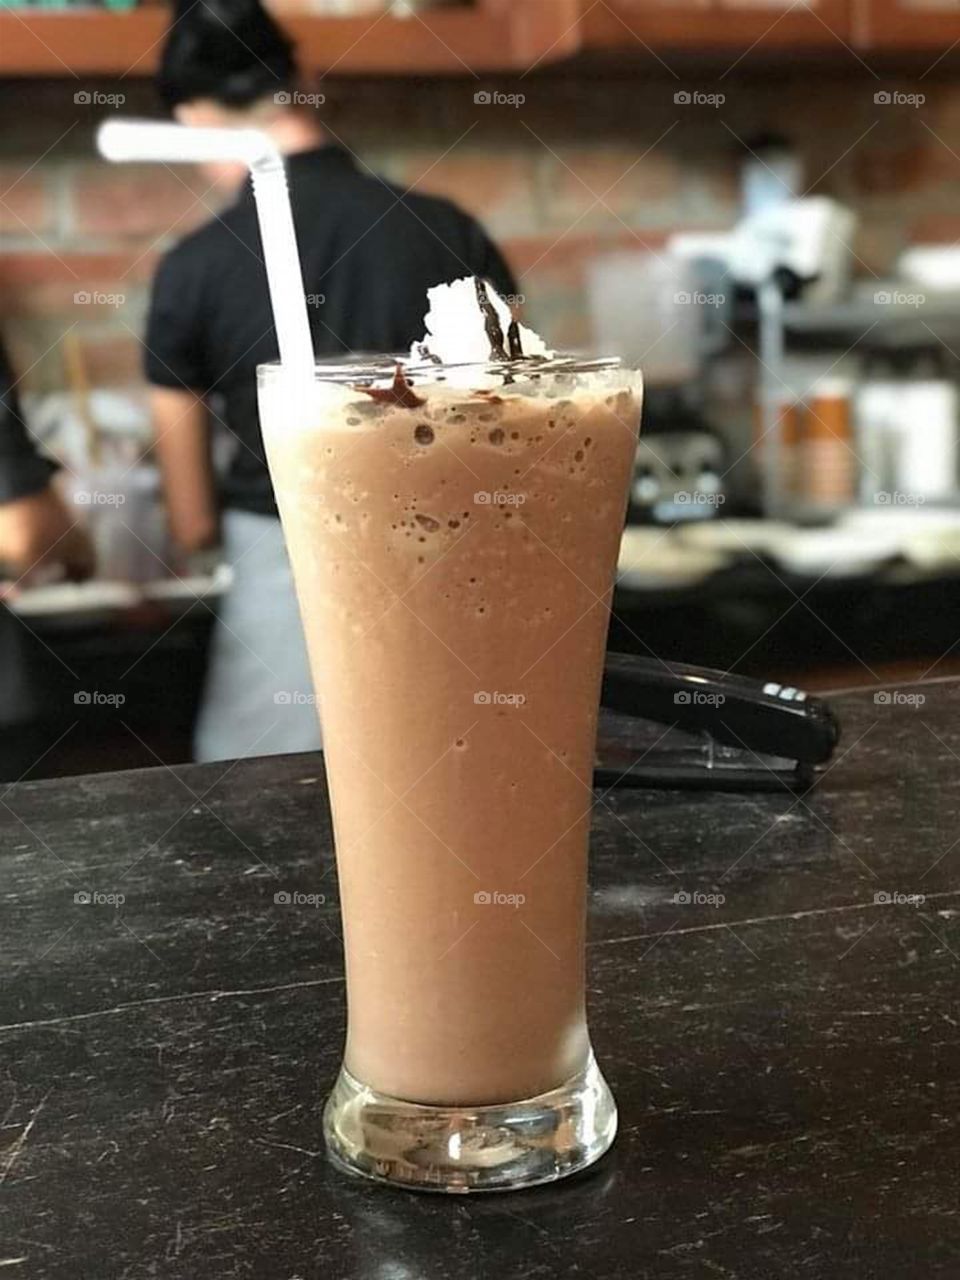 Fresh Chocolate Drink from Real Cocoa Paste